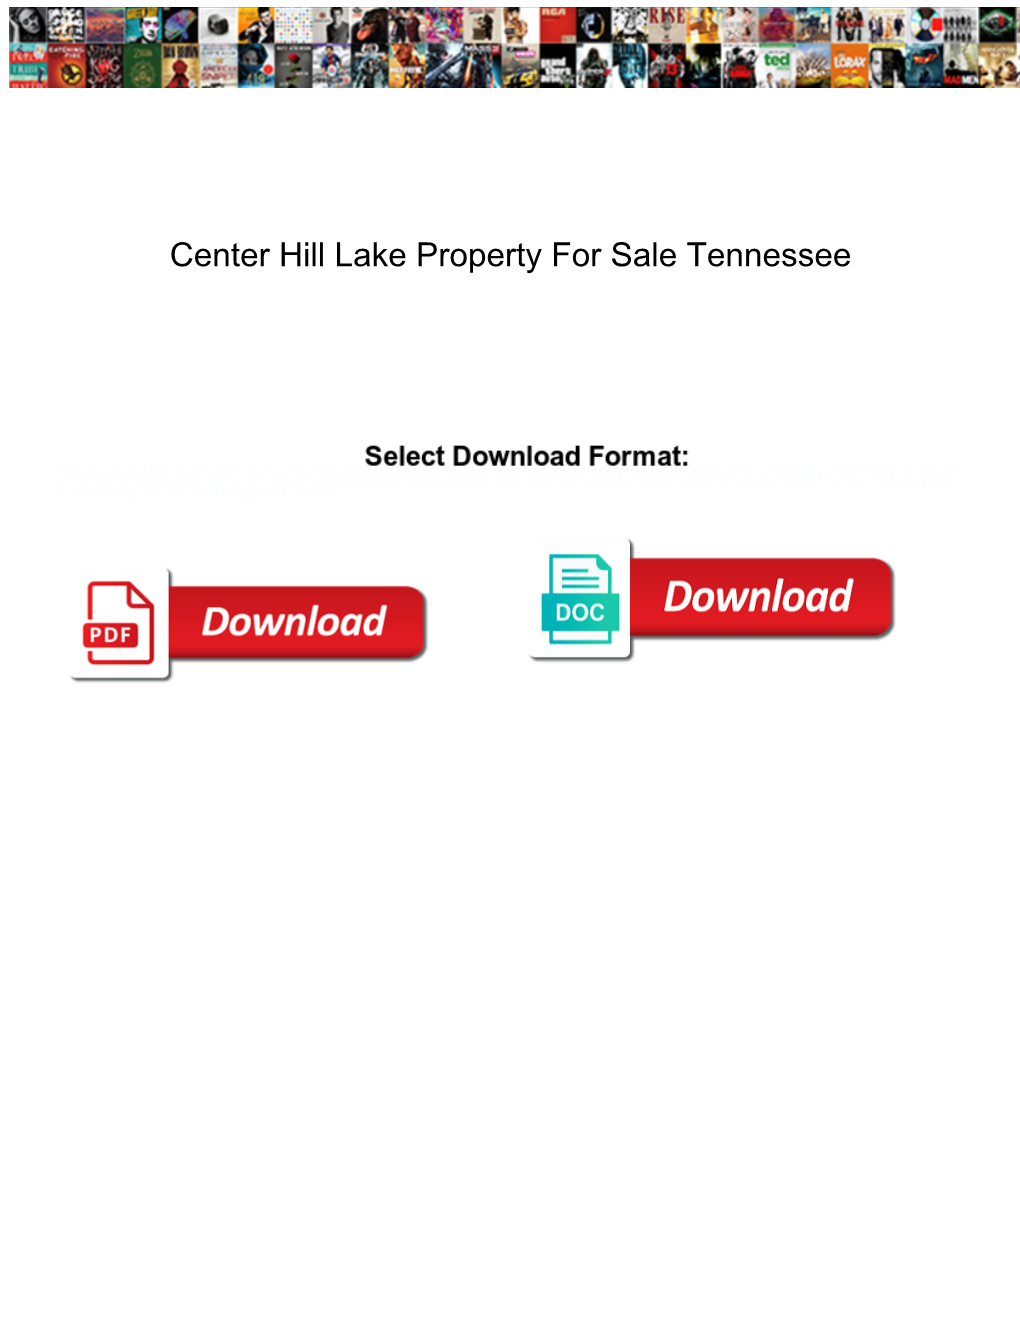 Center Hill Lake Property for Sale Tennessee